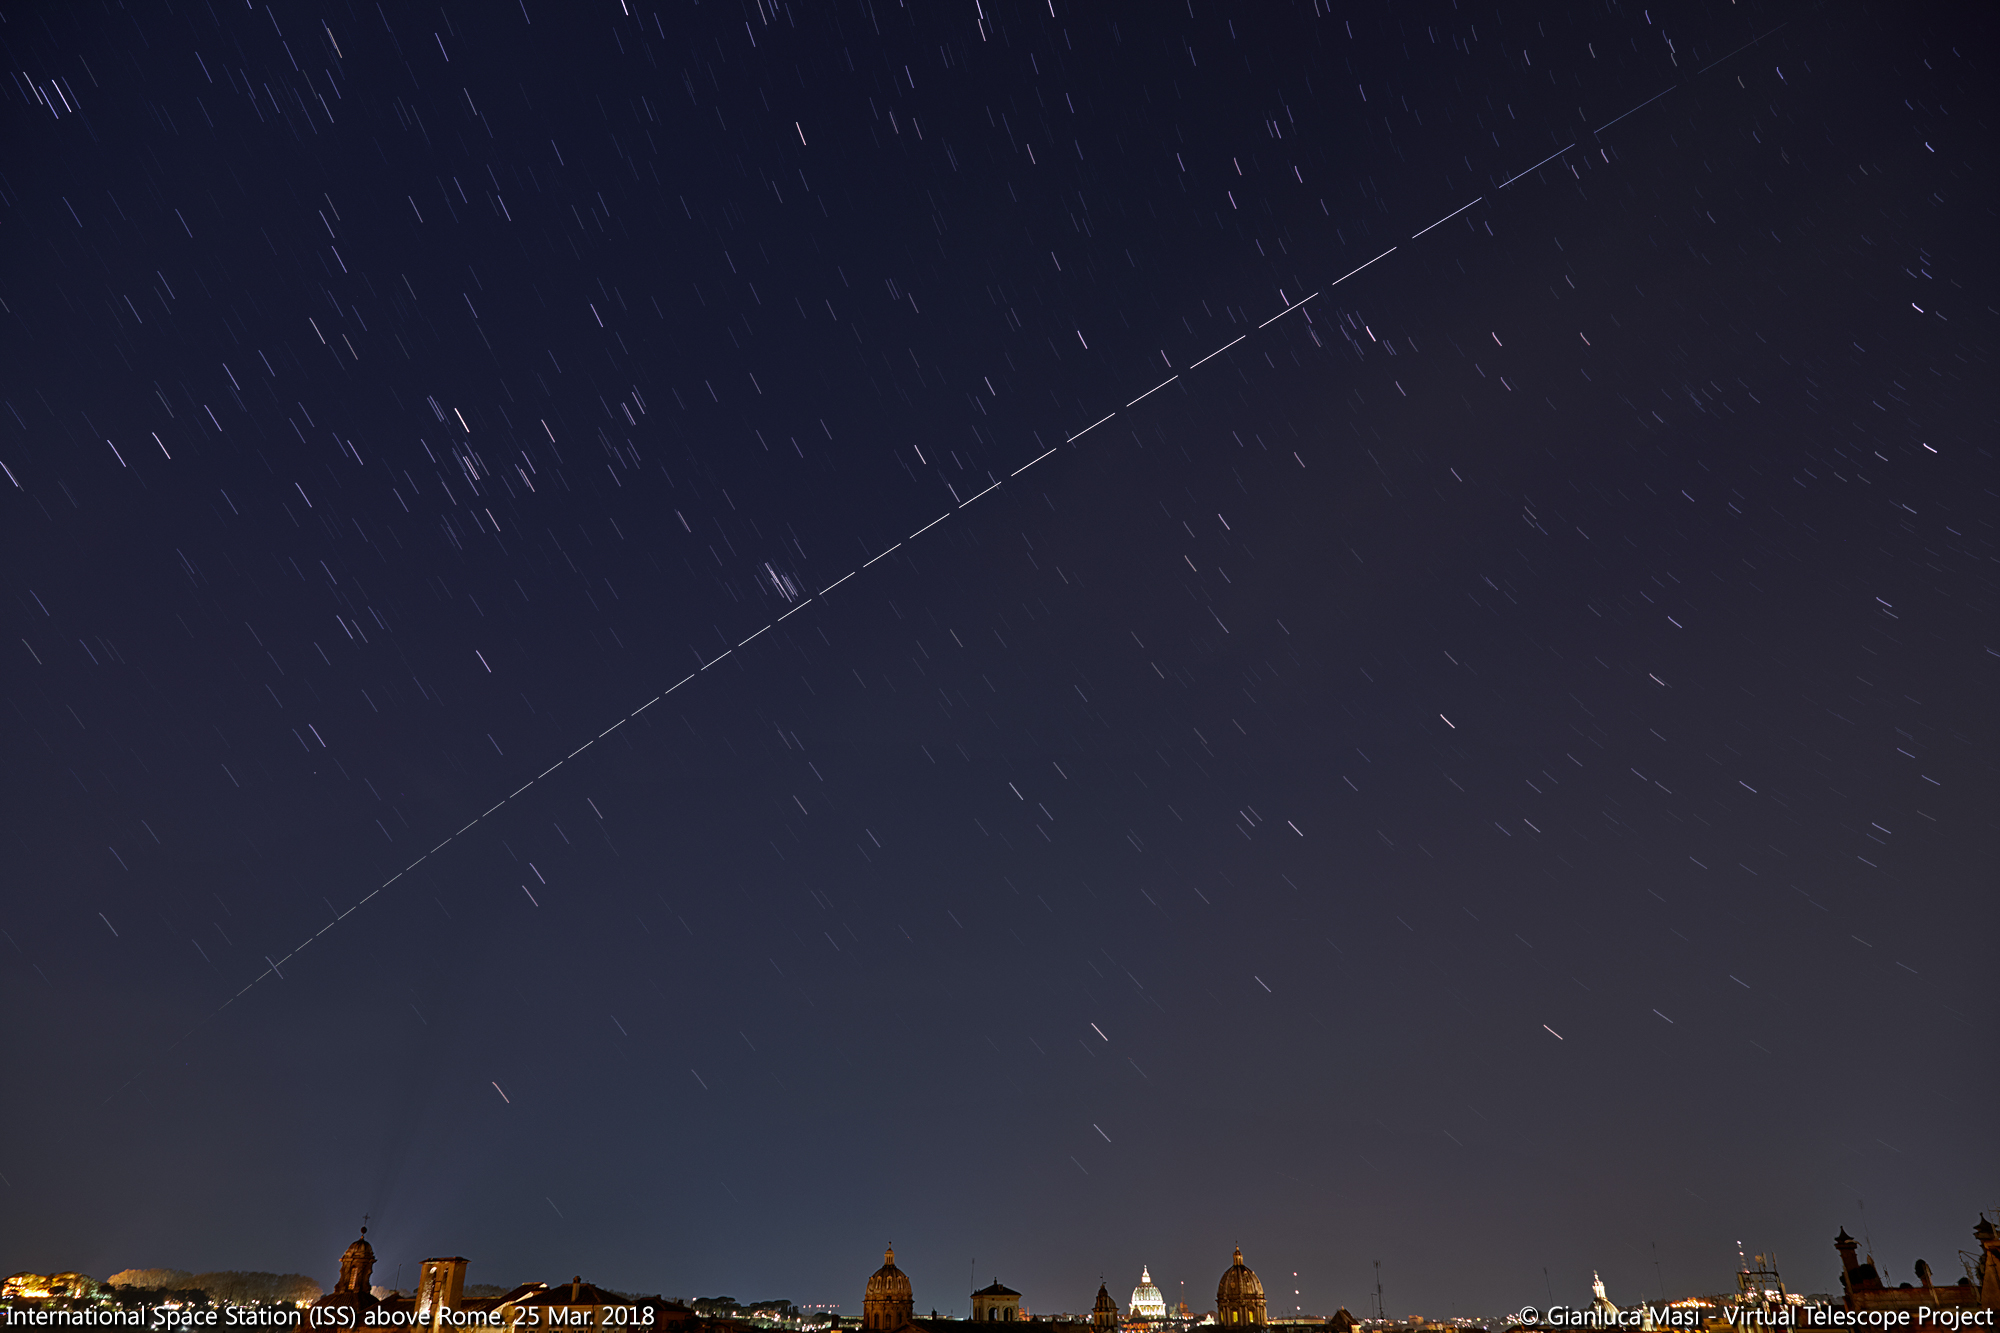 The international Space Station (ISS) crosses the sky above Rome. 25 Mar. 2018